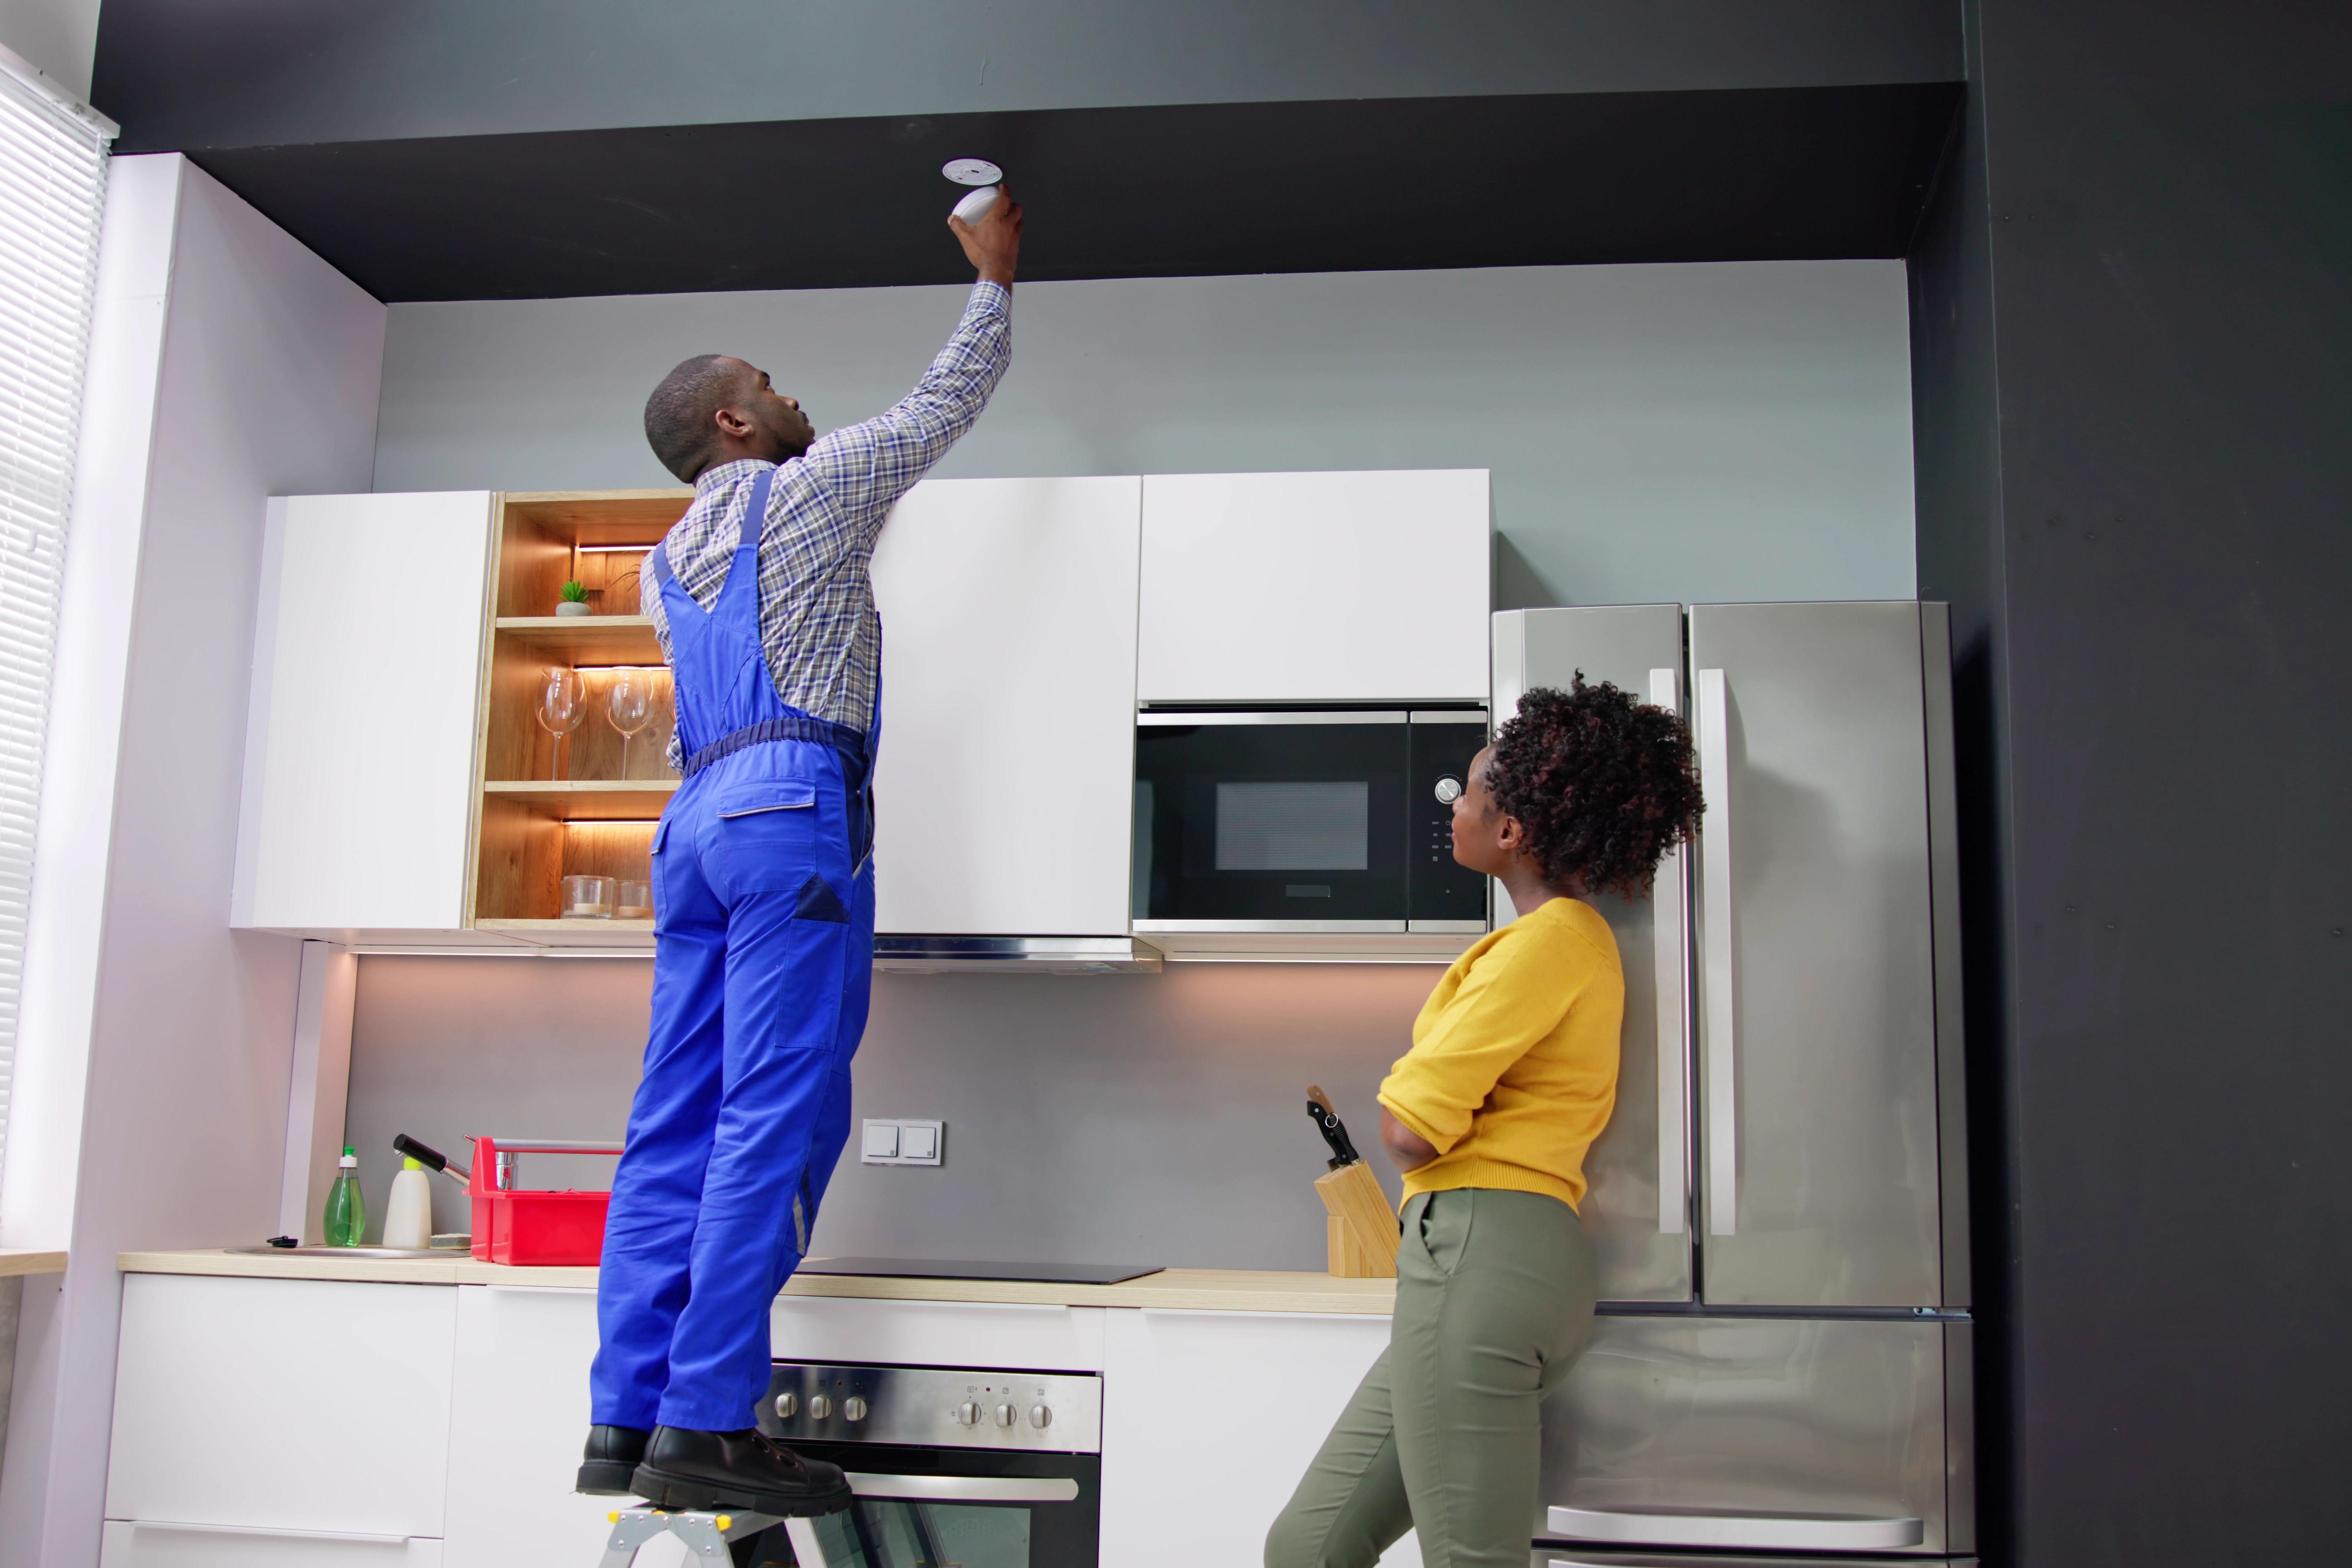 Man replacing the smoke alarm while woman stands and watches